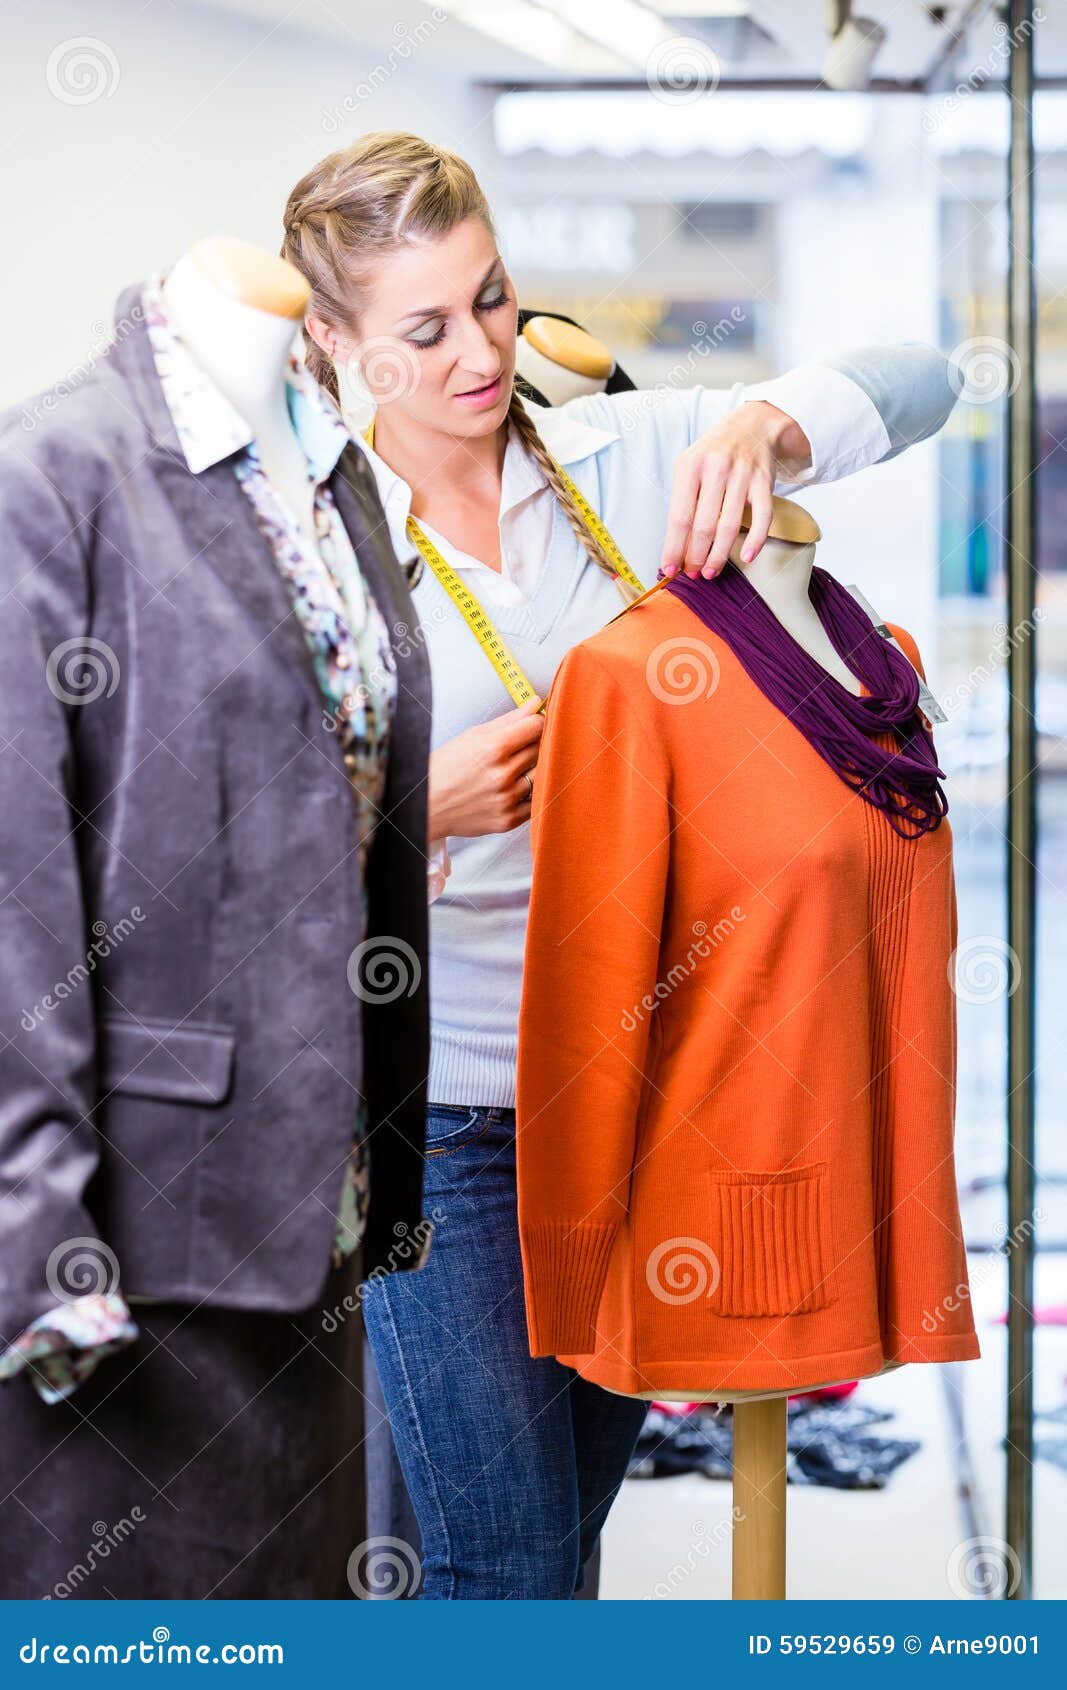 Small Business Owner Dressing Shop Window Stock Image - Image of ...